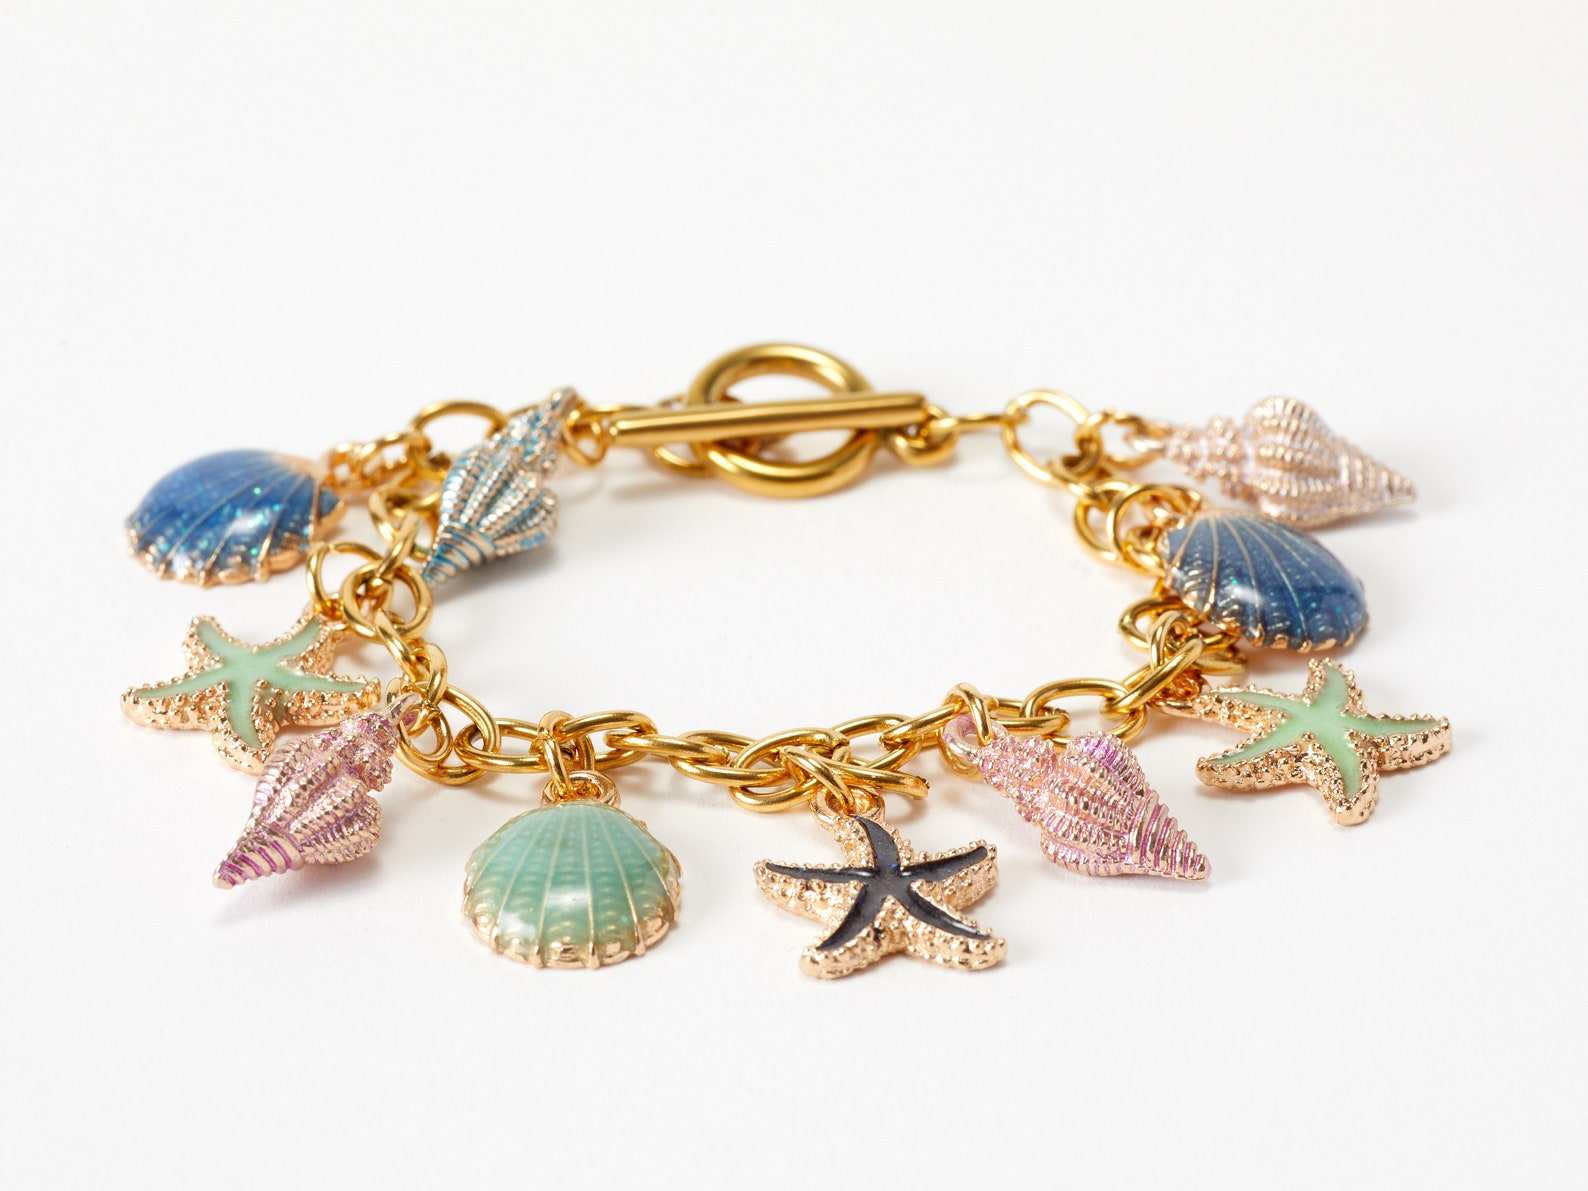 Charm Bracelet With Enameled by the Sea Charms - Etsy